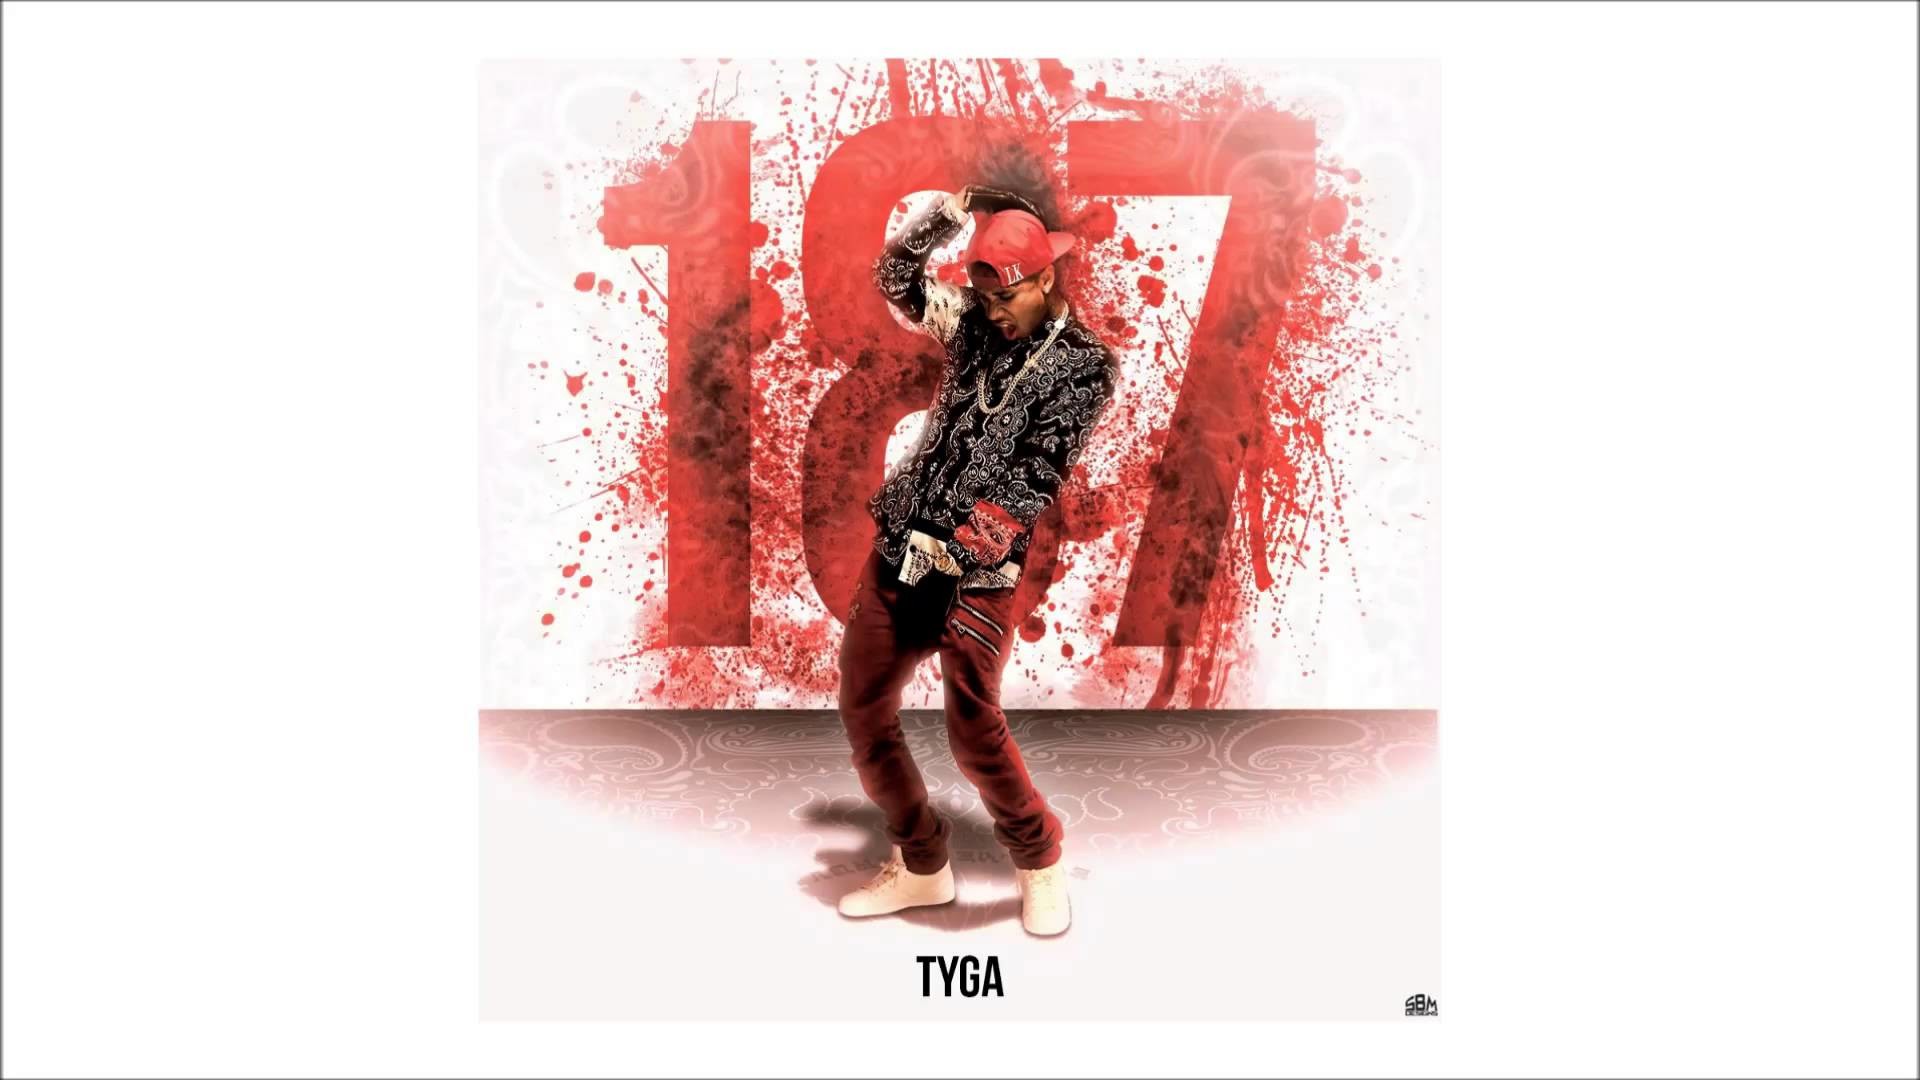 1920x1080 Tyga - This is realllllyyy dope.